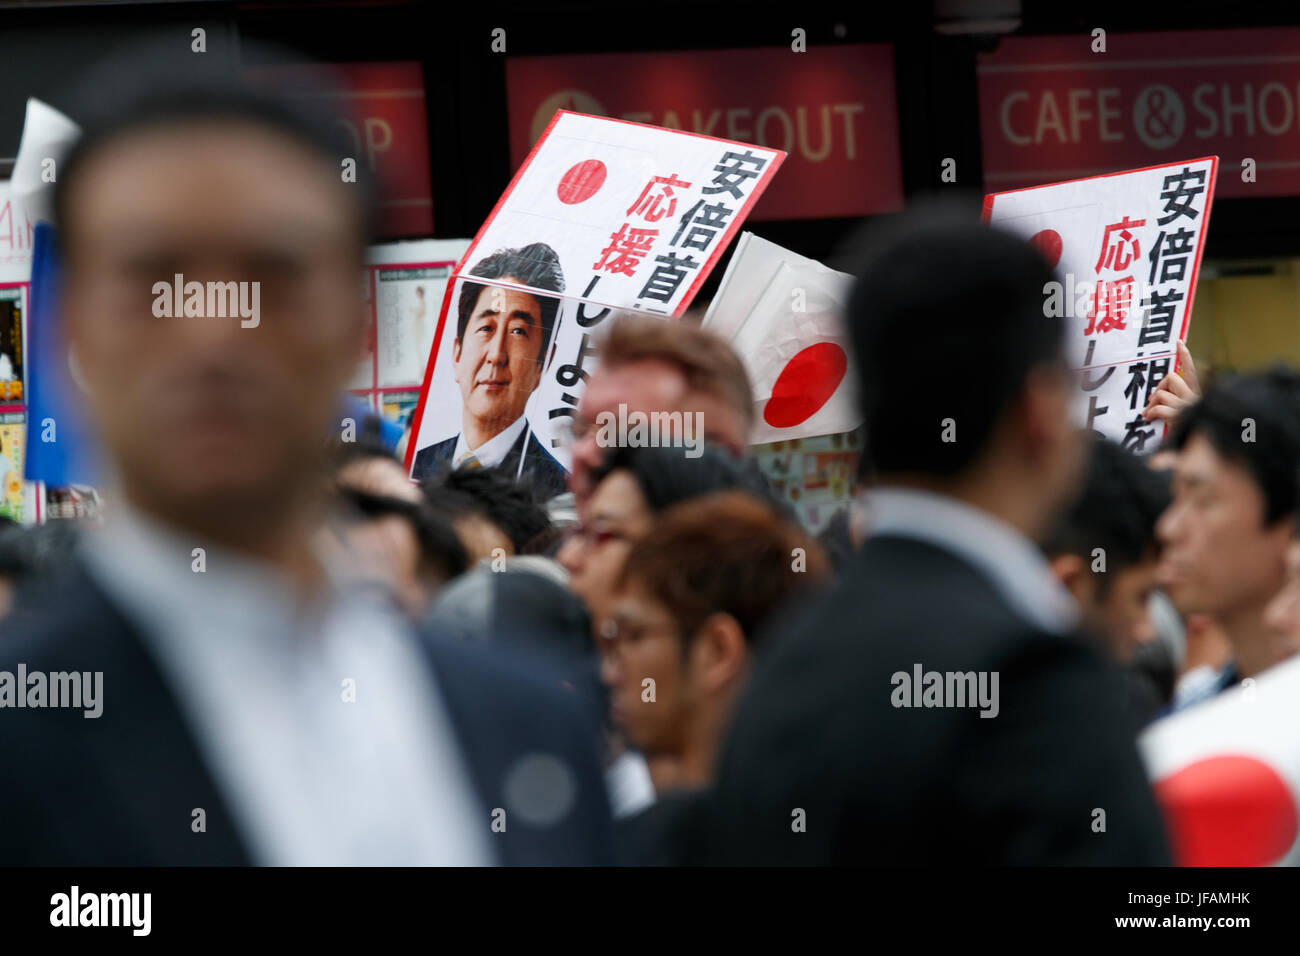 Tokyo, Japan. 1st July, 2017. Anti-Abe protesters appear during a campaign event of the Liberal Democratic Party of Japan for tomorrow's Tokyo Metropolitan Assembly election on July 1, 2017, Tokyo, Japan. A group of anti-Abe protesters appeared holding placards and chanting against the Prime Minister during the campaign event in support of LDP party candidate Aya Nakamura. Credit: Rodrigo Reyes Marin/AFLO/Alamy Live News Stock Photo